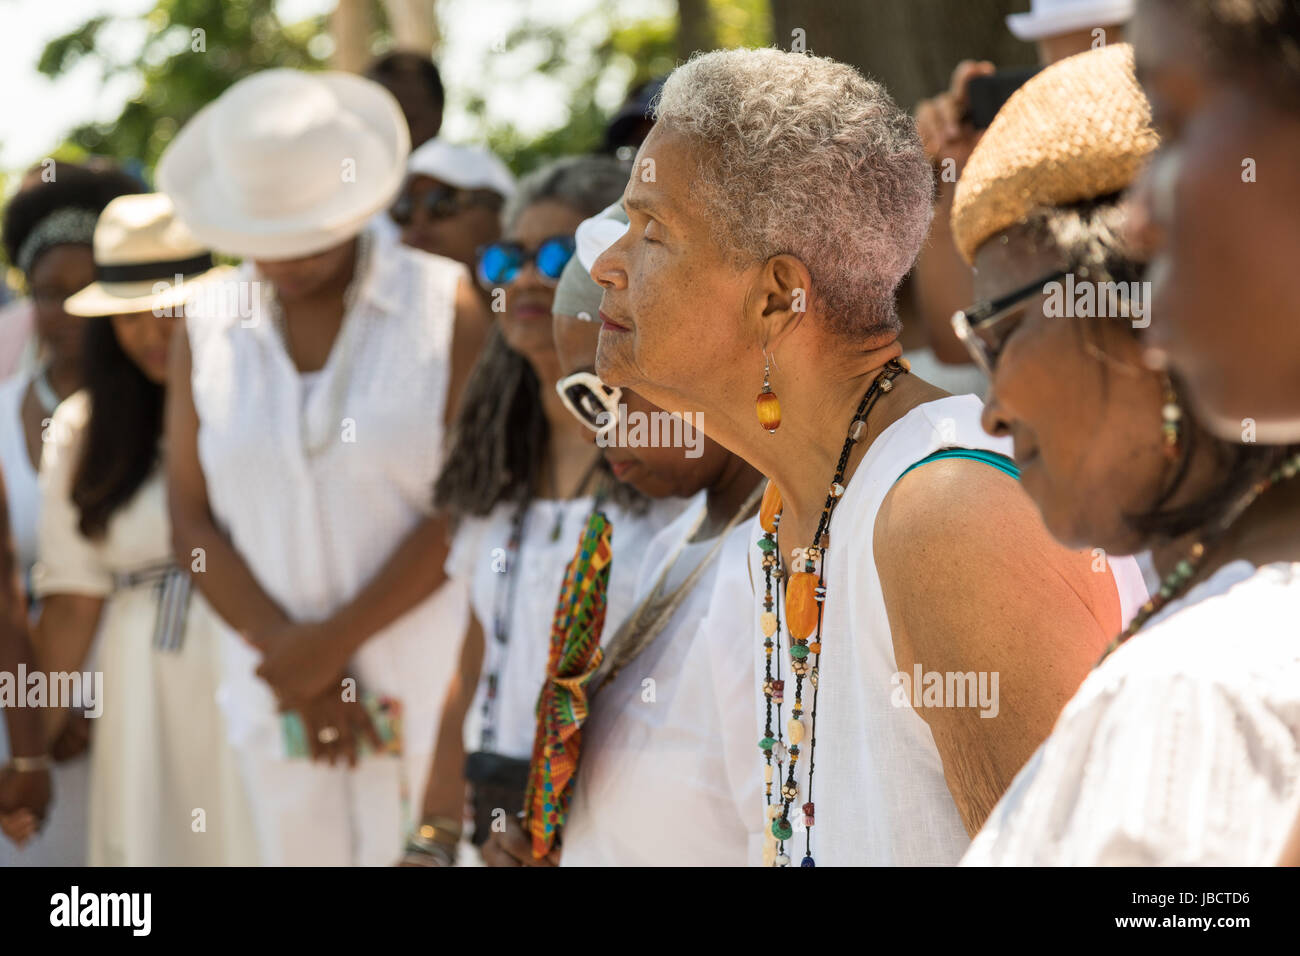 Descendants of enslaved Africans brought to Charleston in the Middle Passage hold a prayer service during a remembrance ceremony at Fort Moutrie National Monument June 10, 2017 in Sullivan's Island, South Carolina. The Middle Passage refers to the triangular trade in which millions of Africans were shipped to the New World as part of the Atlantic slave trade. An estimated 15% of the Africans died at sea and considerably more in the process of capturing and transporting. The total number of African deaths directly attributable to the Middle Passage voyage is estimated up to two million Africans Stock Photo